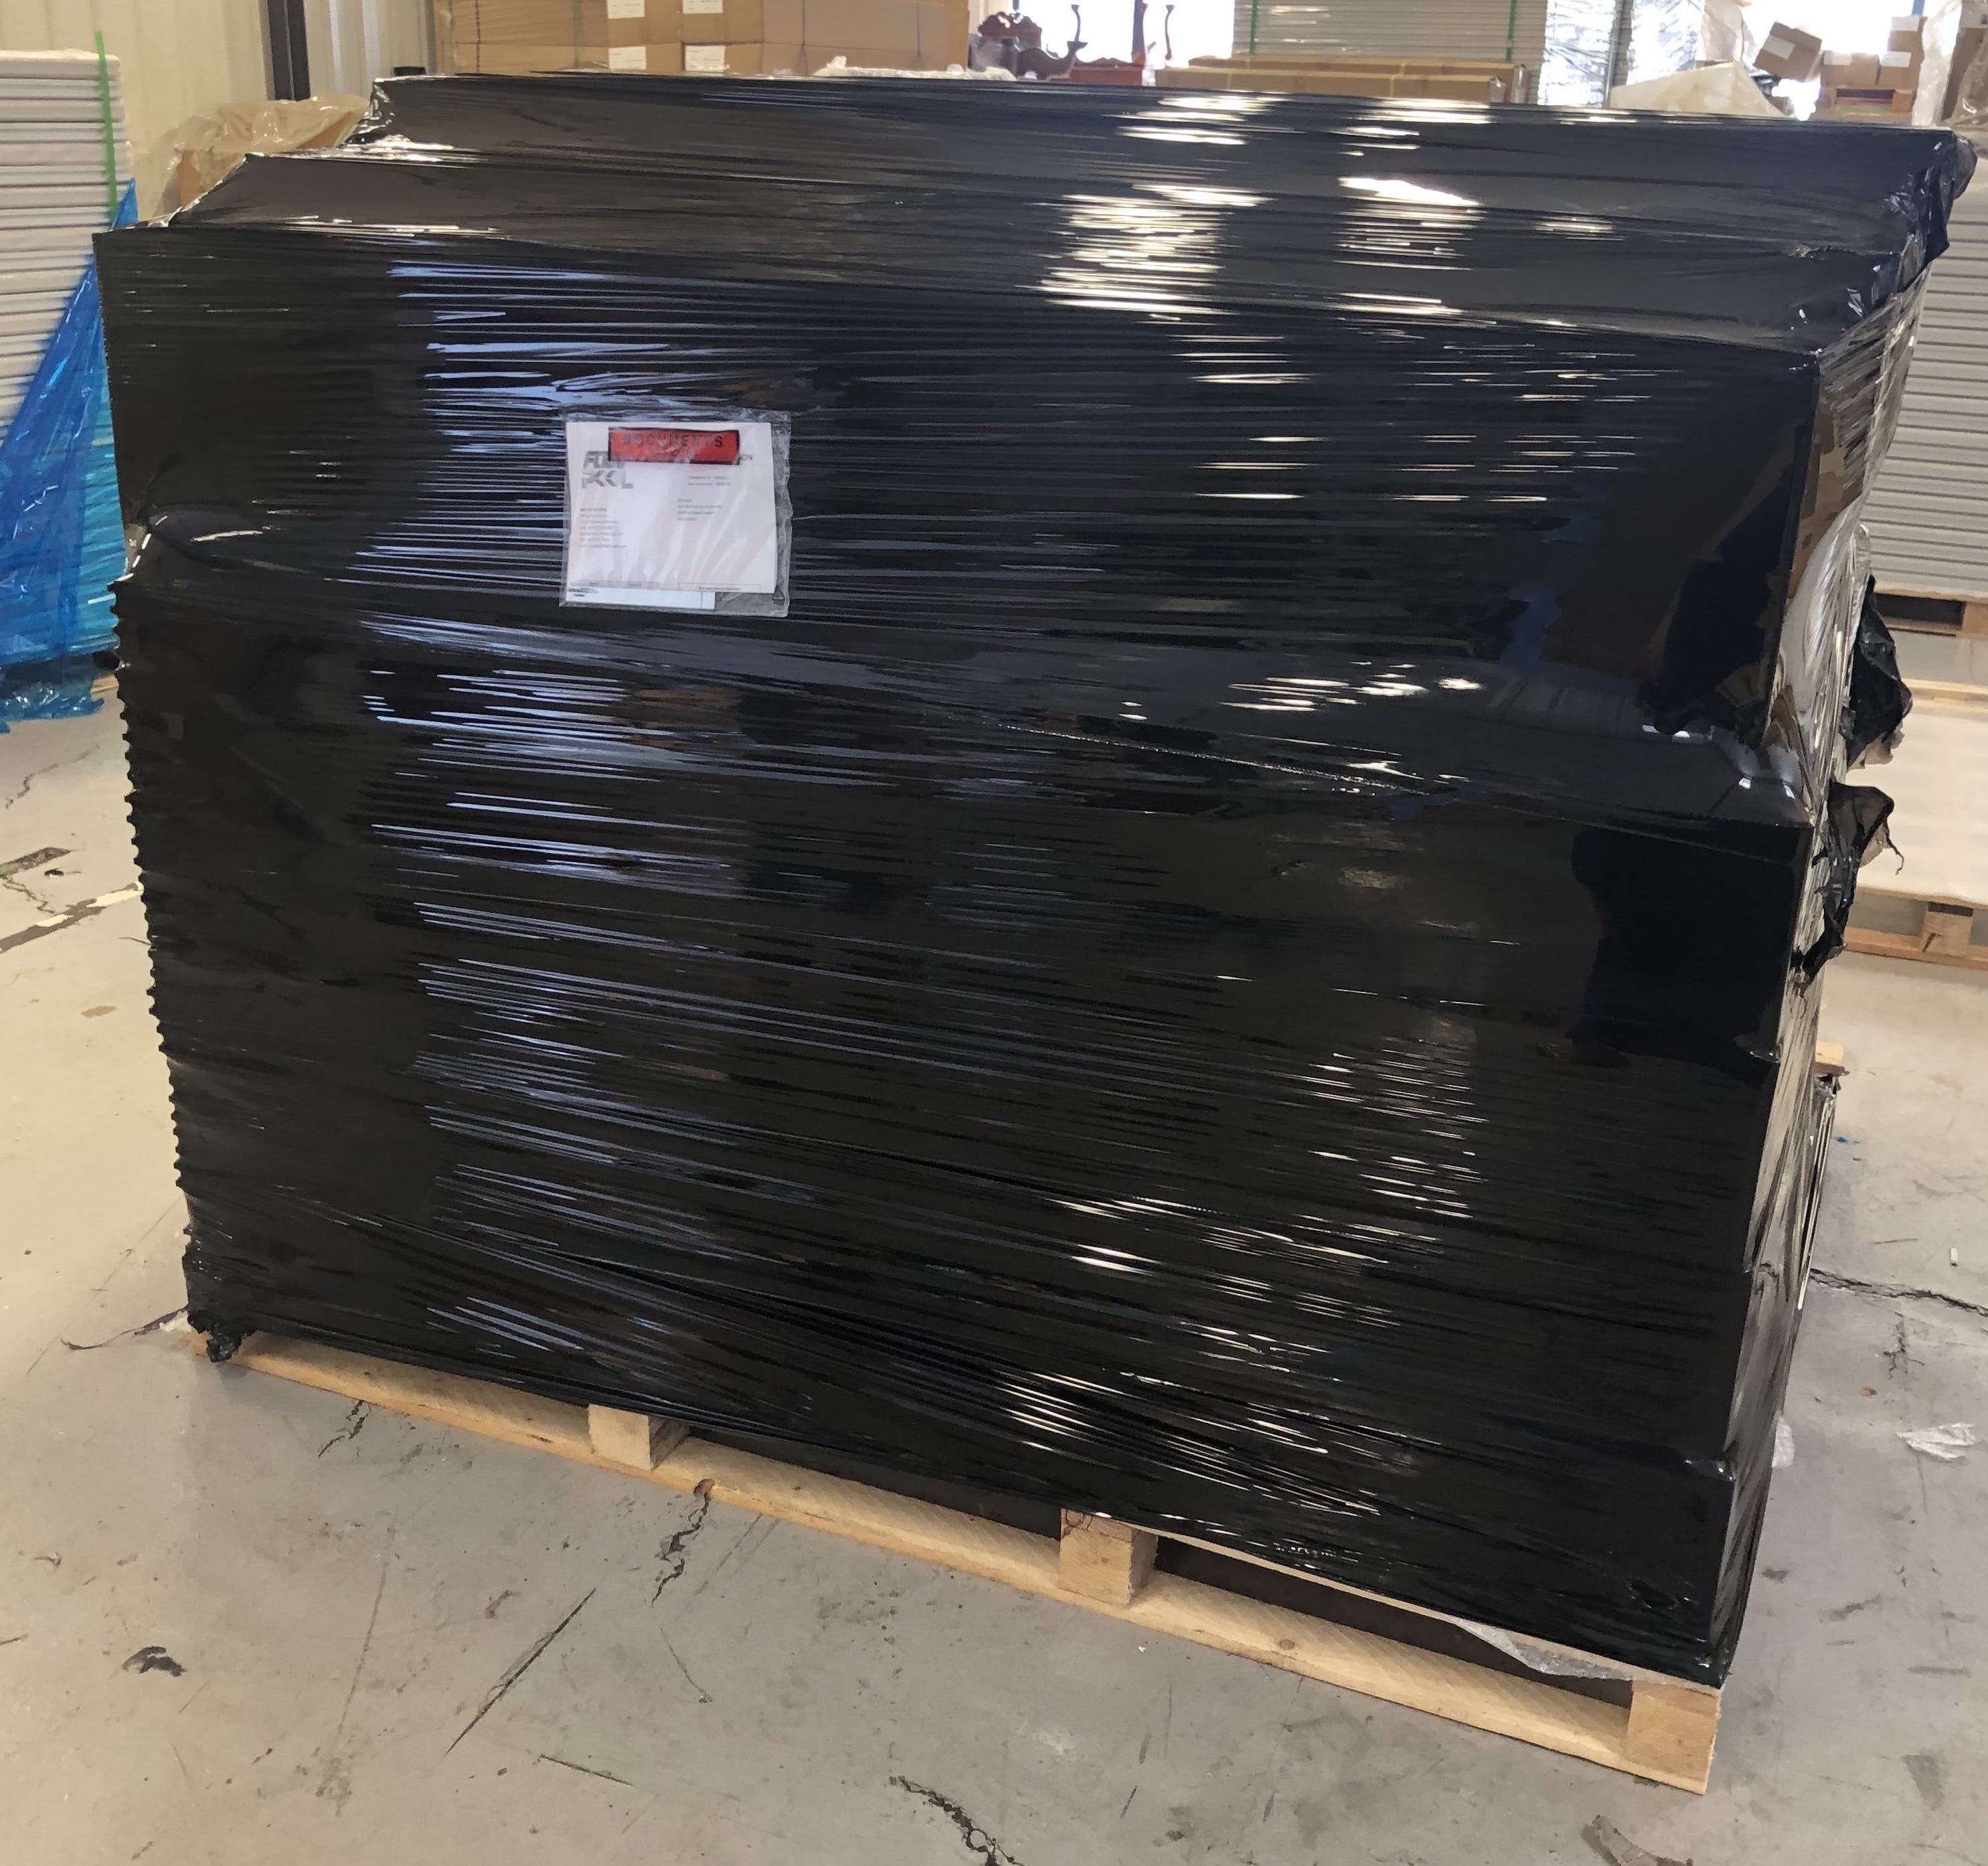 Wrapped pallet for delivery of swimming pool kits